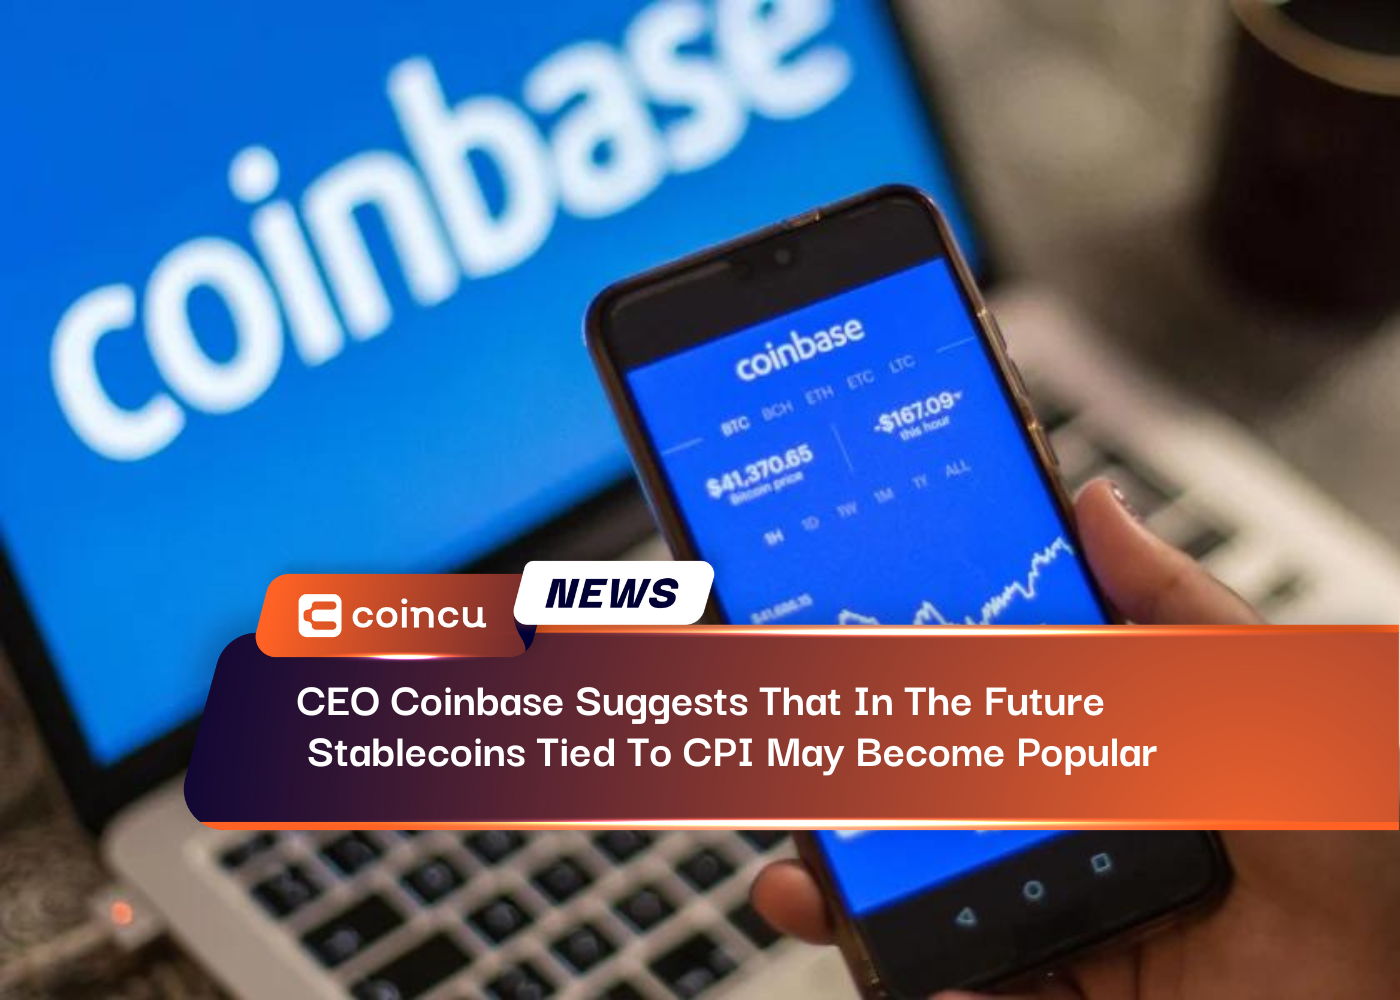 CEO Coinbase Suggests That In The Future